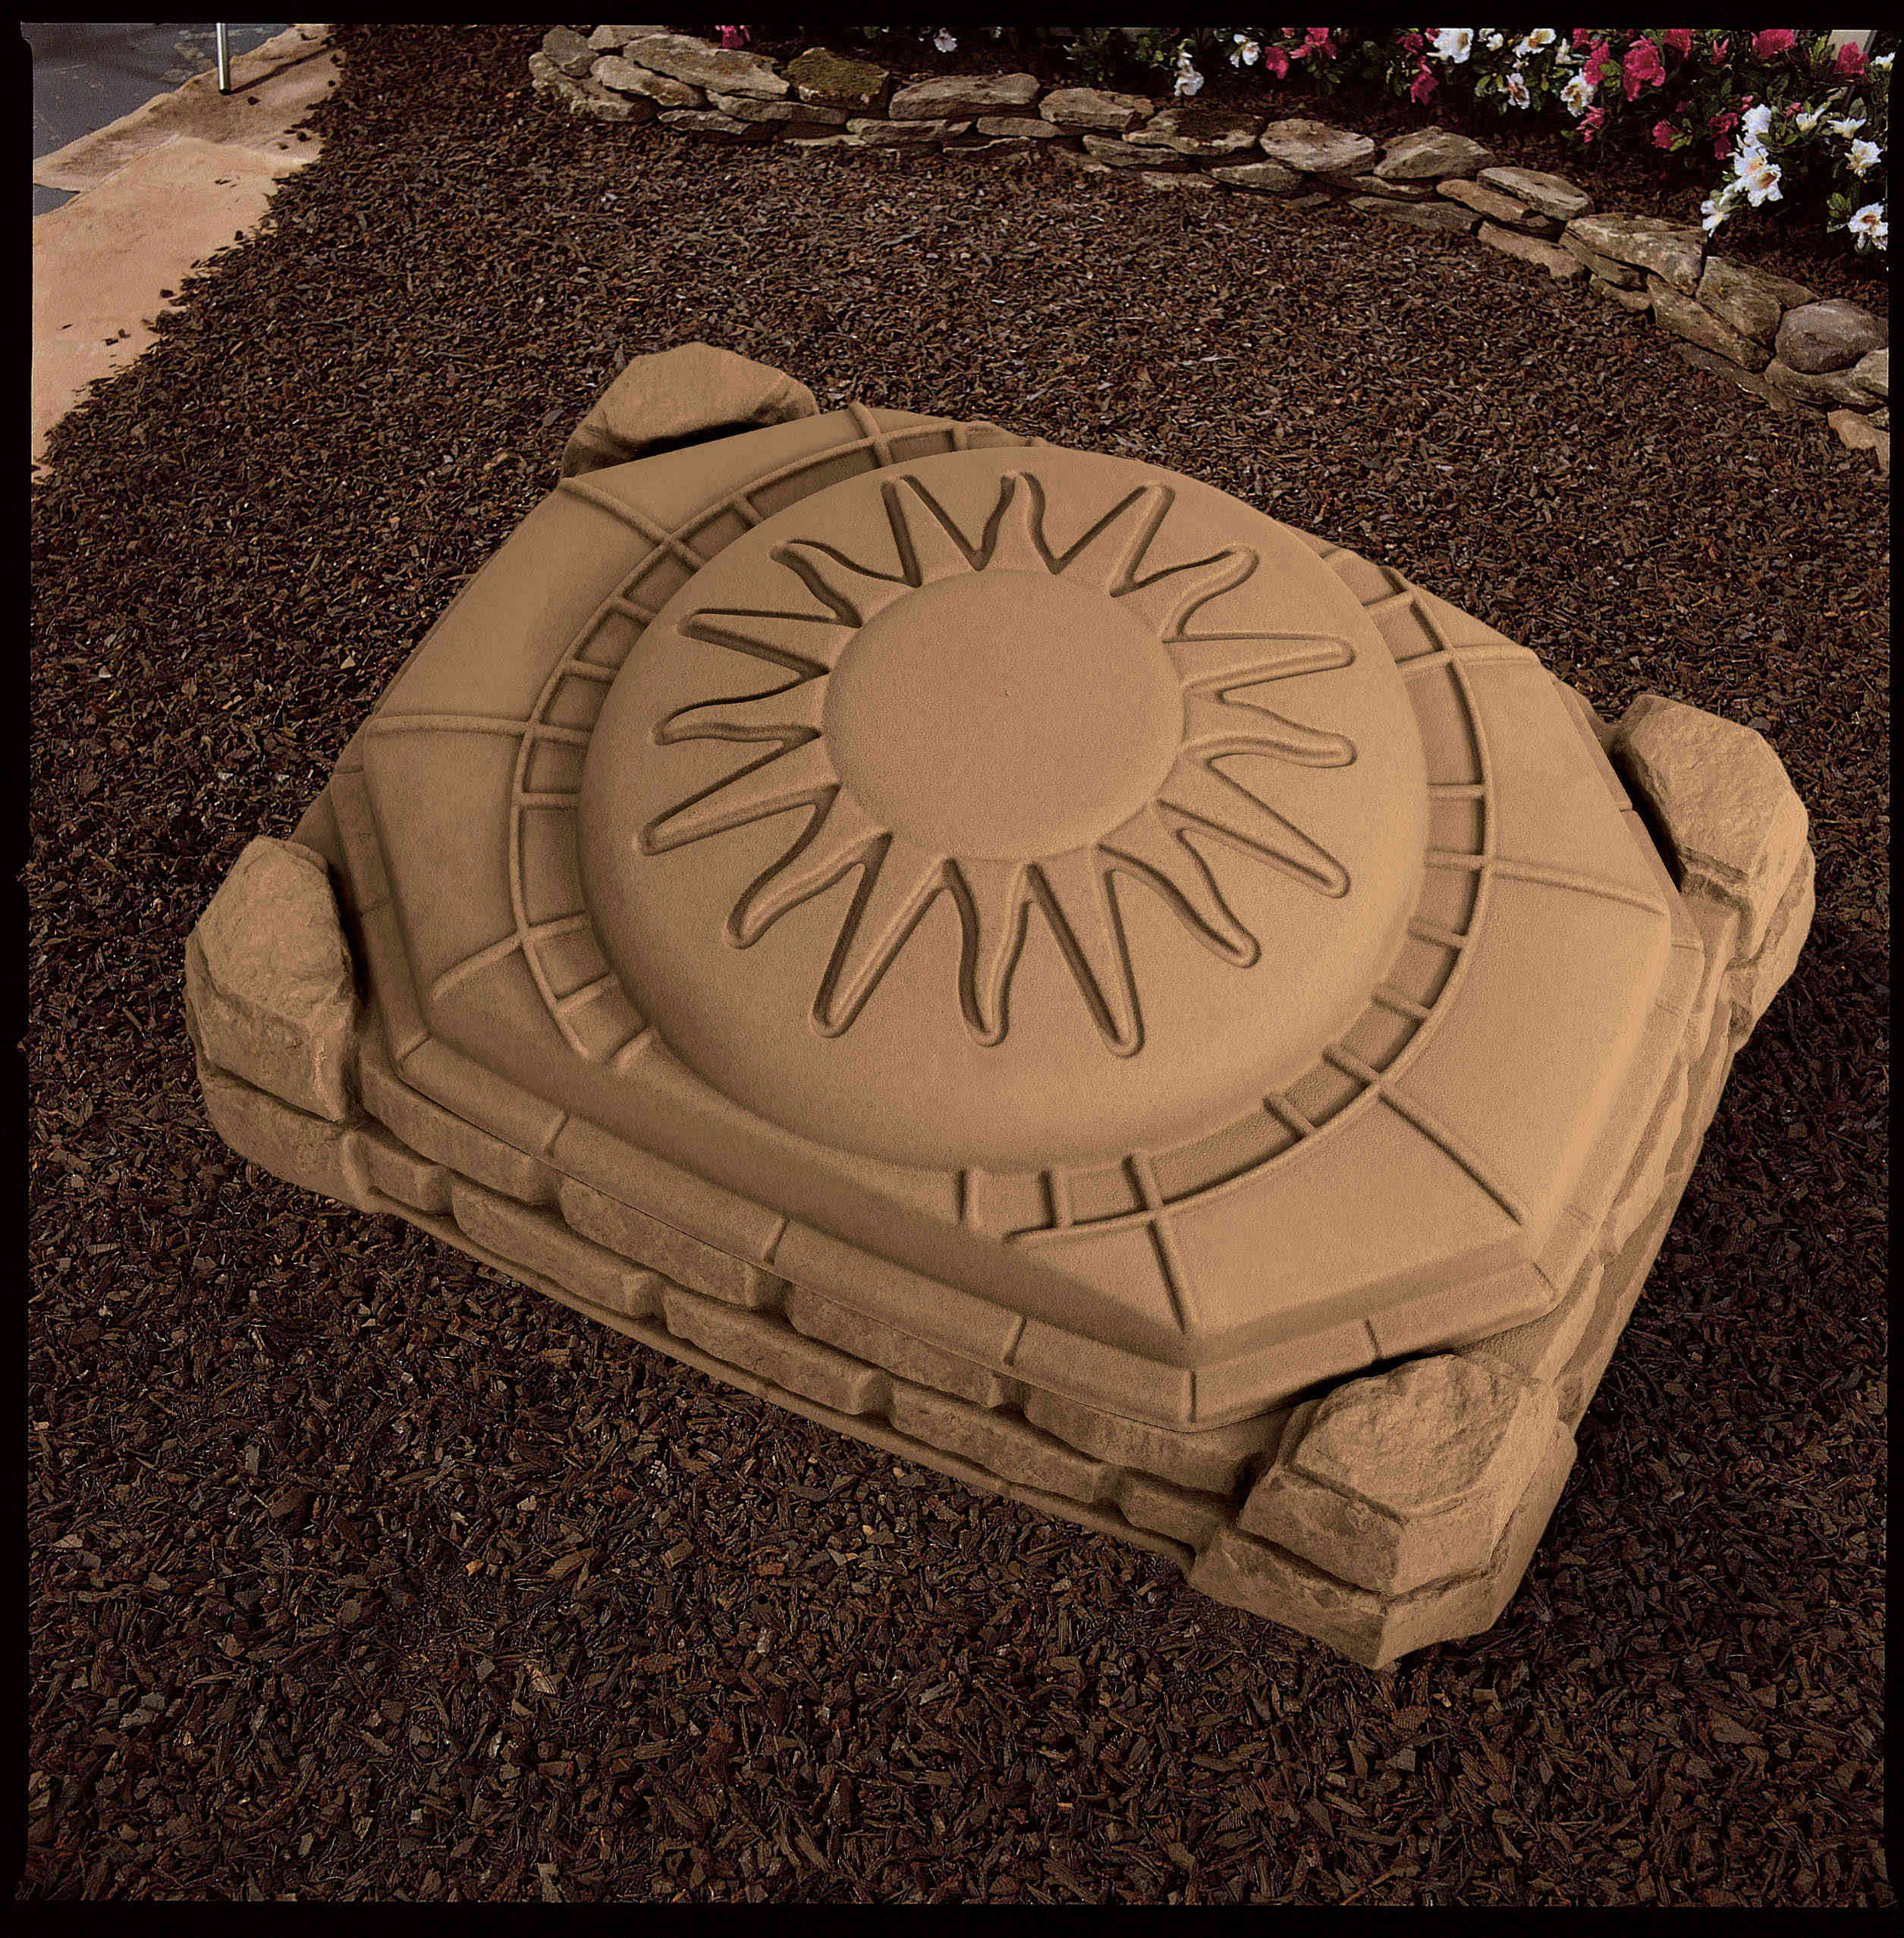 Kidz Rule Play Sand Box, You can enjoy the summer months with this incredible sandbox featuring a fun sun theme in a contemporary design that's perfect for any backyard. It blends easily with your landscaping theme, while providing hours of provide amusem